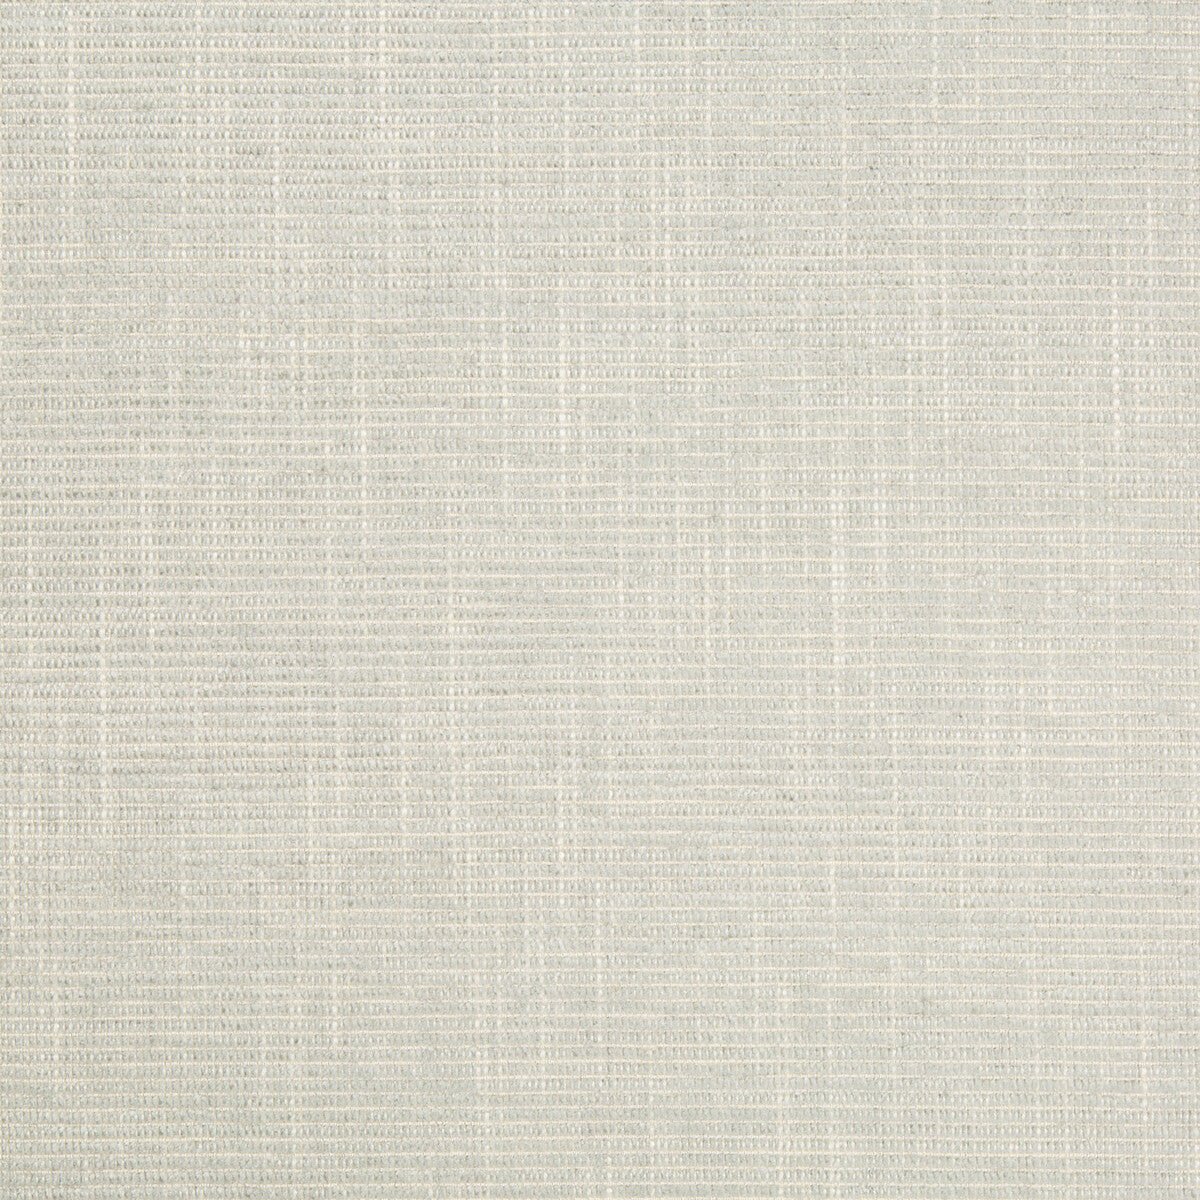 Mineralogy fabric in cumulus color - pattern 34842.11.0 - by Kravet Couture in the Barbara Barry Panorama collection